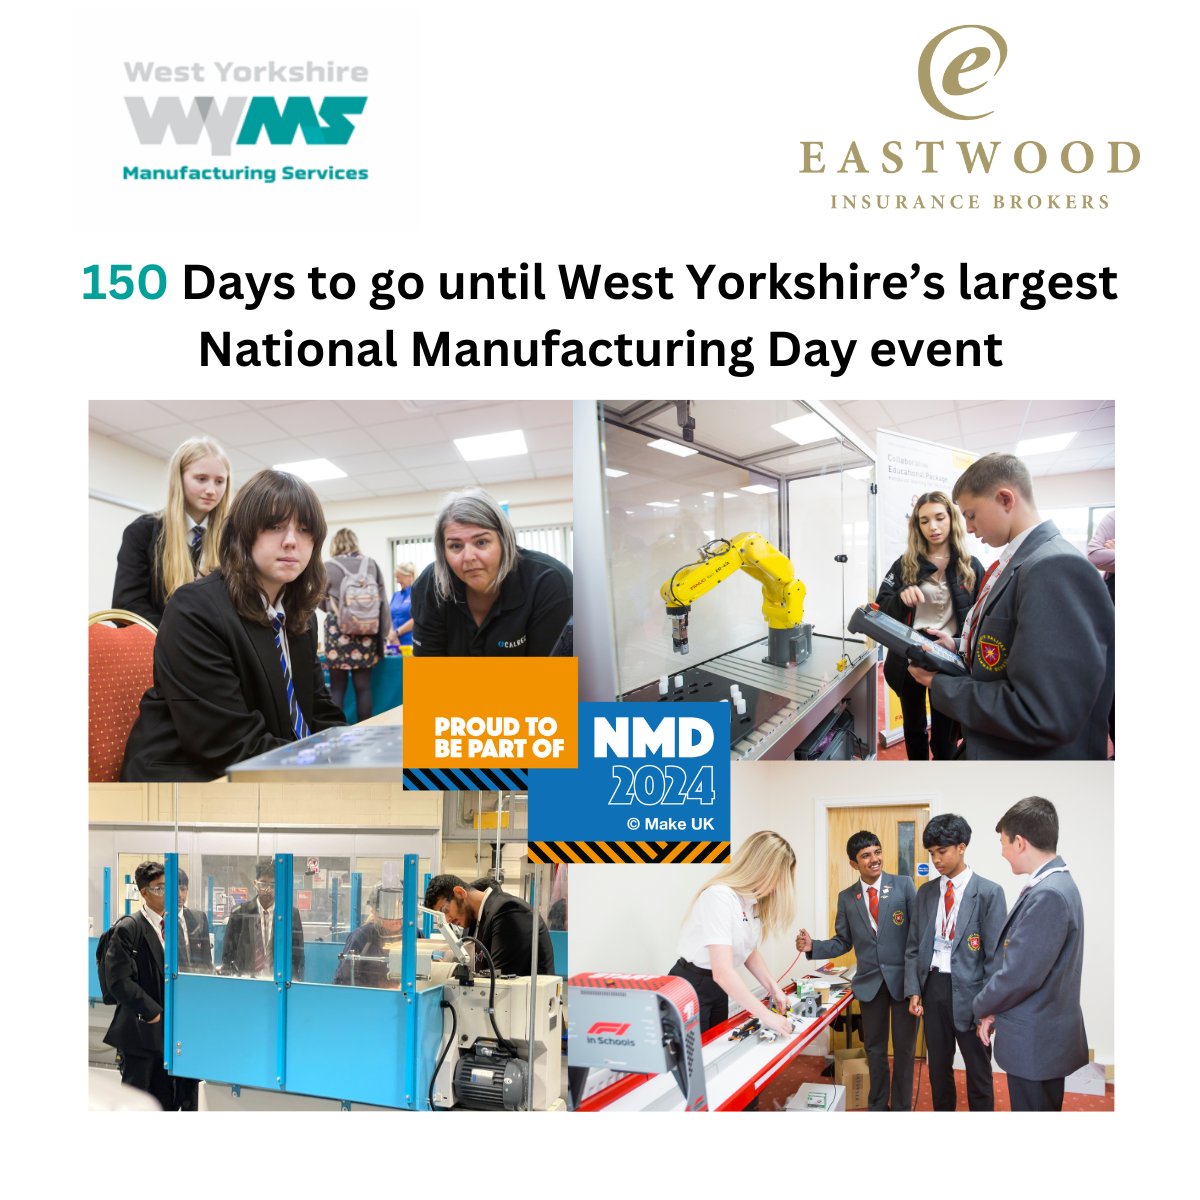 Are you a manufacturer or a school careers teacher? Interested in demonstrating the amazing career opportunities in manufacturing? Join us at West Yorkshire's largest National Manufacturing Day event on 26 Sept. #NMD2024 #150daystogo For more details visit wyms.co.uk/150-days-to-go…